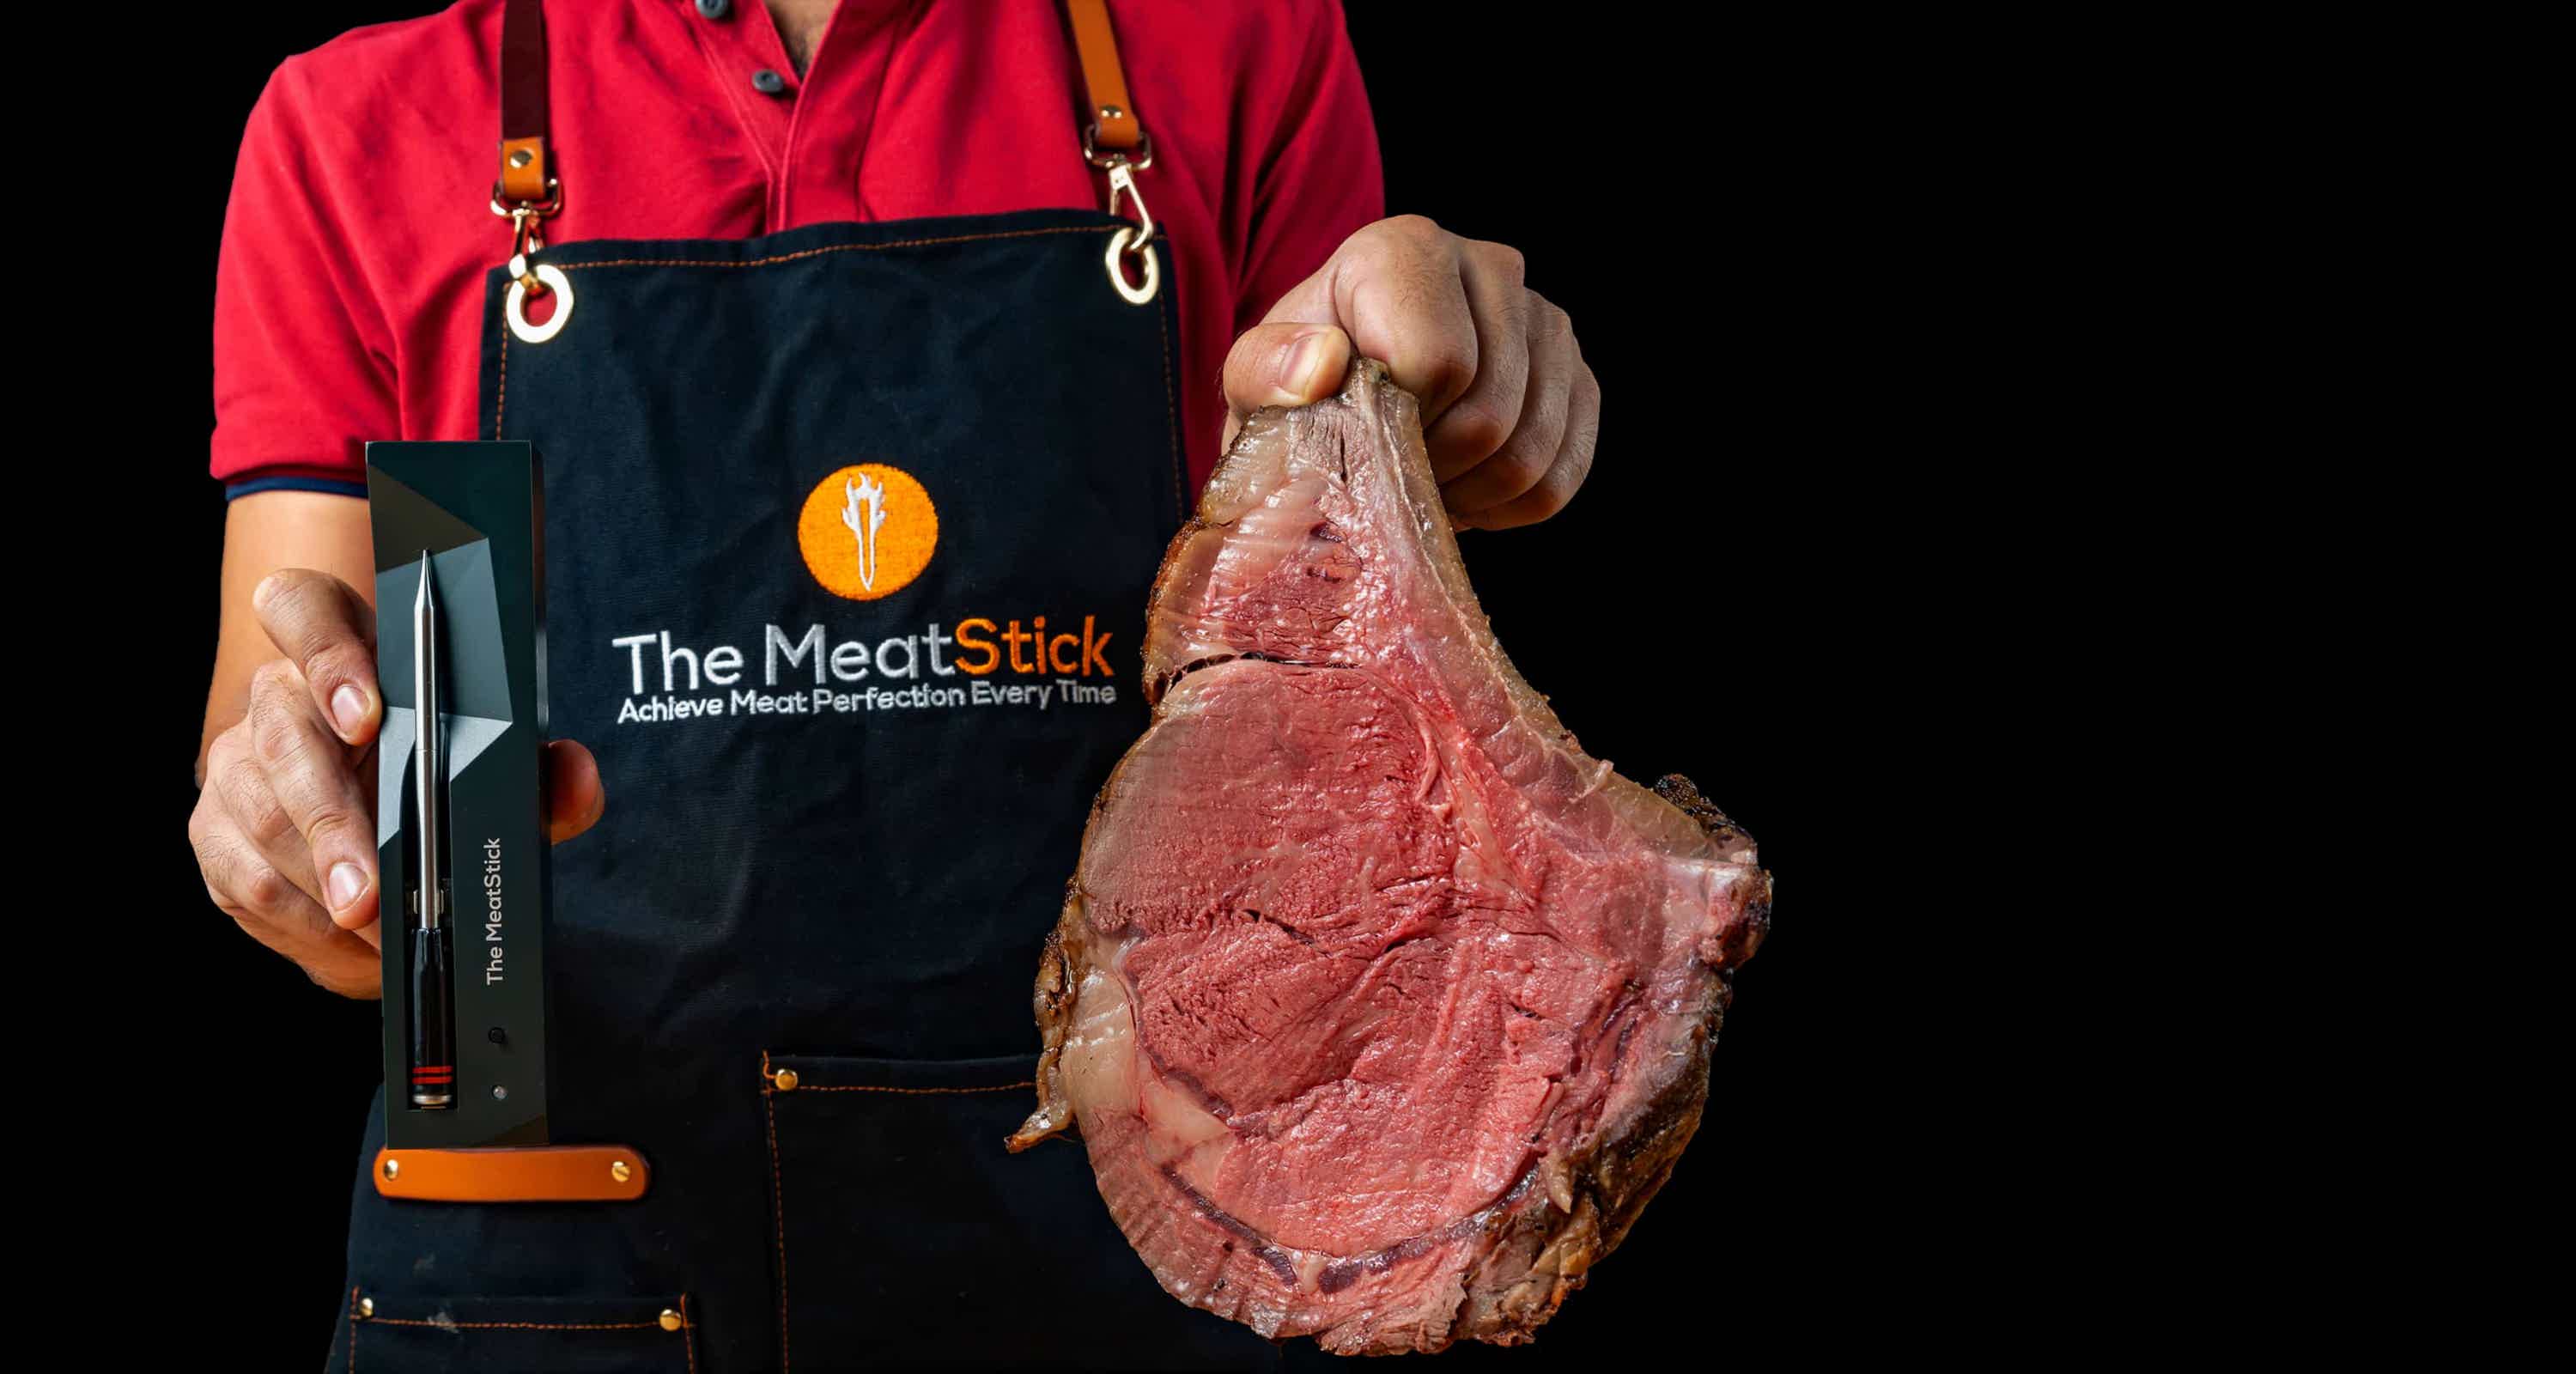 Join us and become one of The MeatStick Dealers